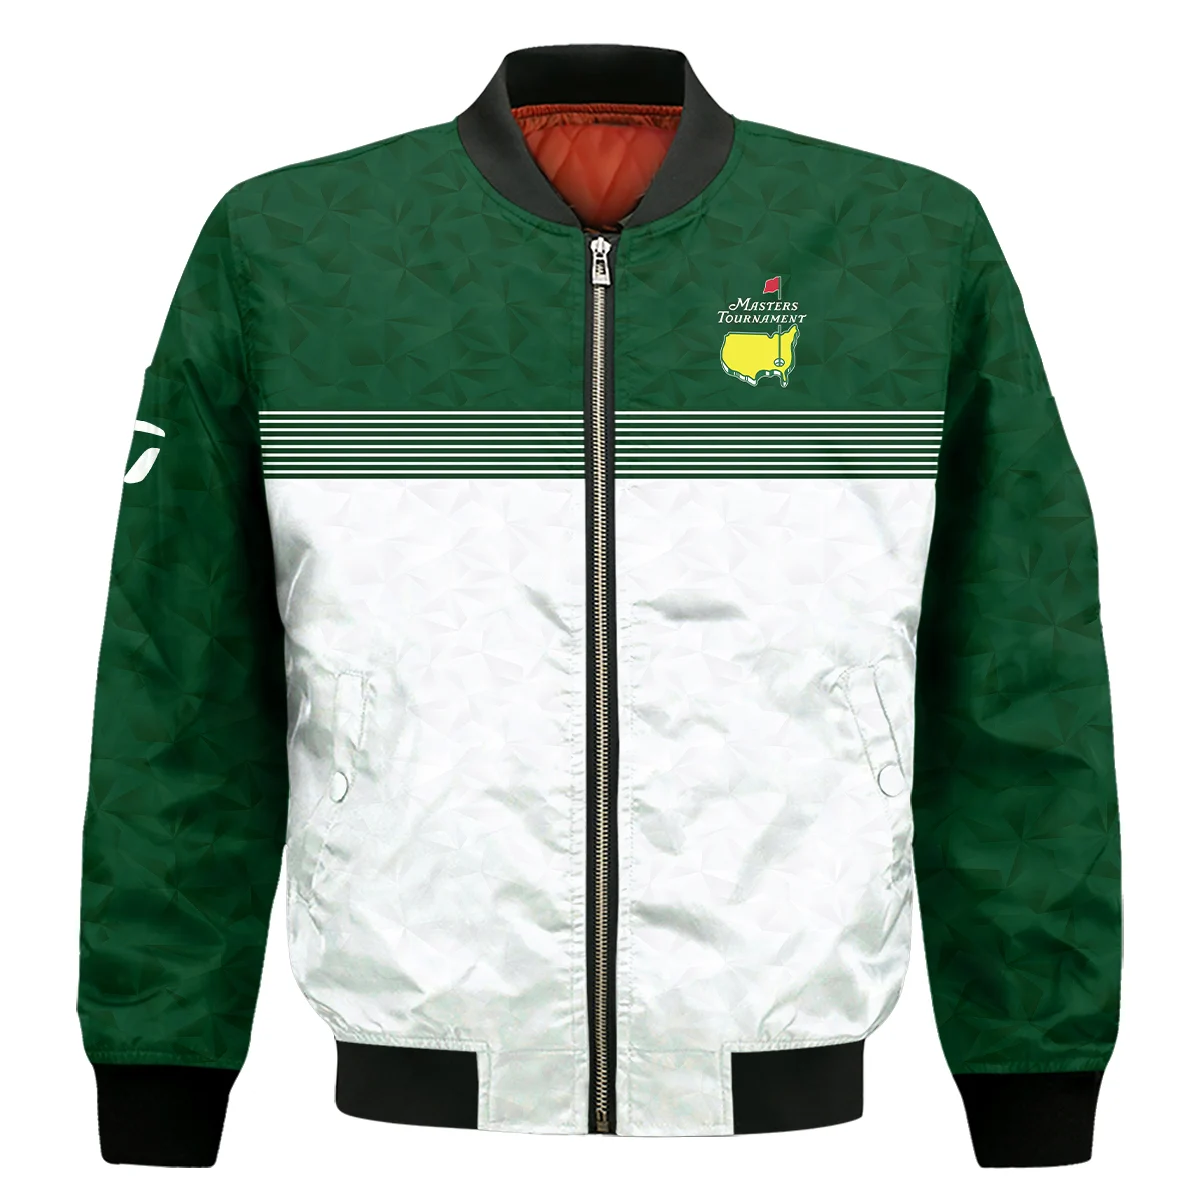 Masters Tournament Taylor Made Bomber Jacket White Pattern White Geometric Abstract Polygon Shape Bomber Jacket GBJ1365